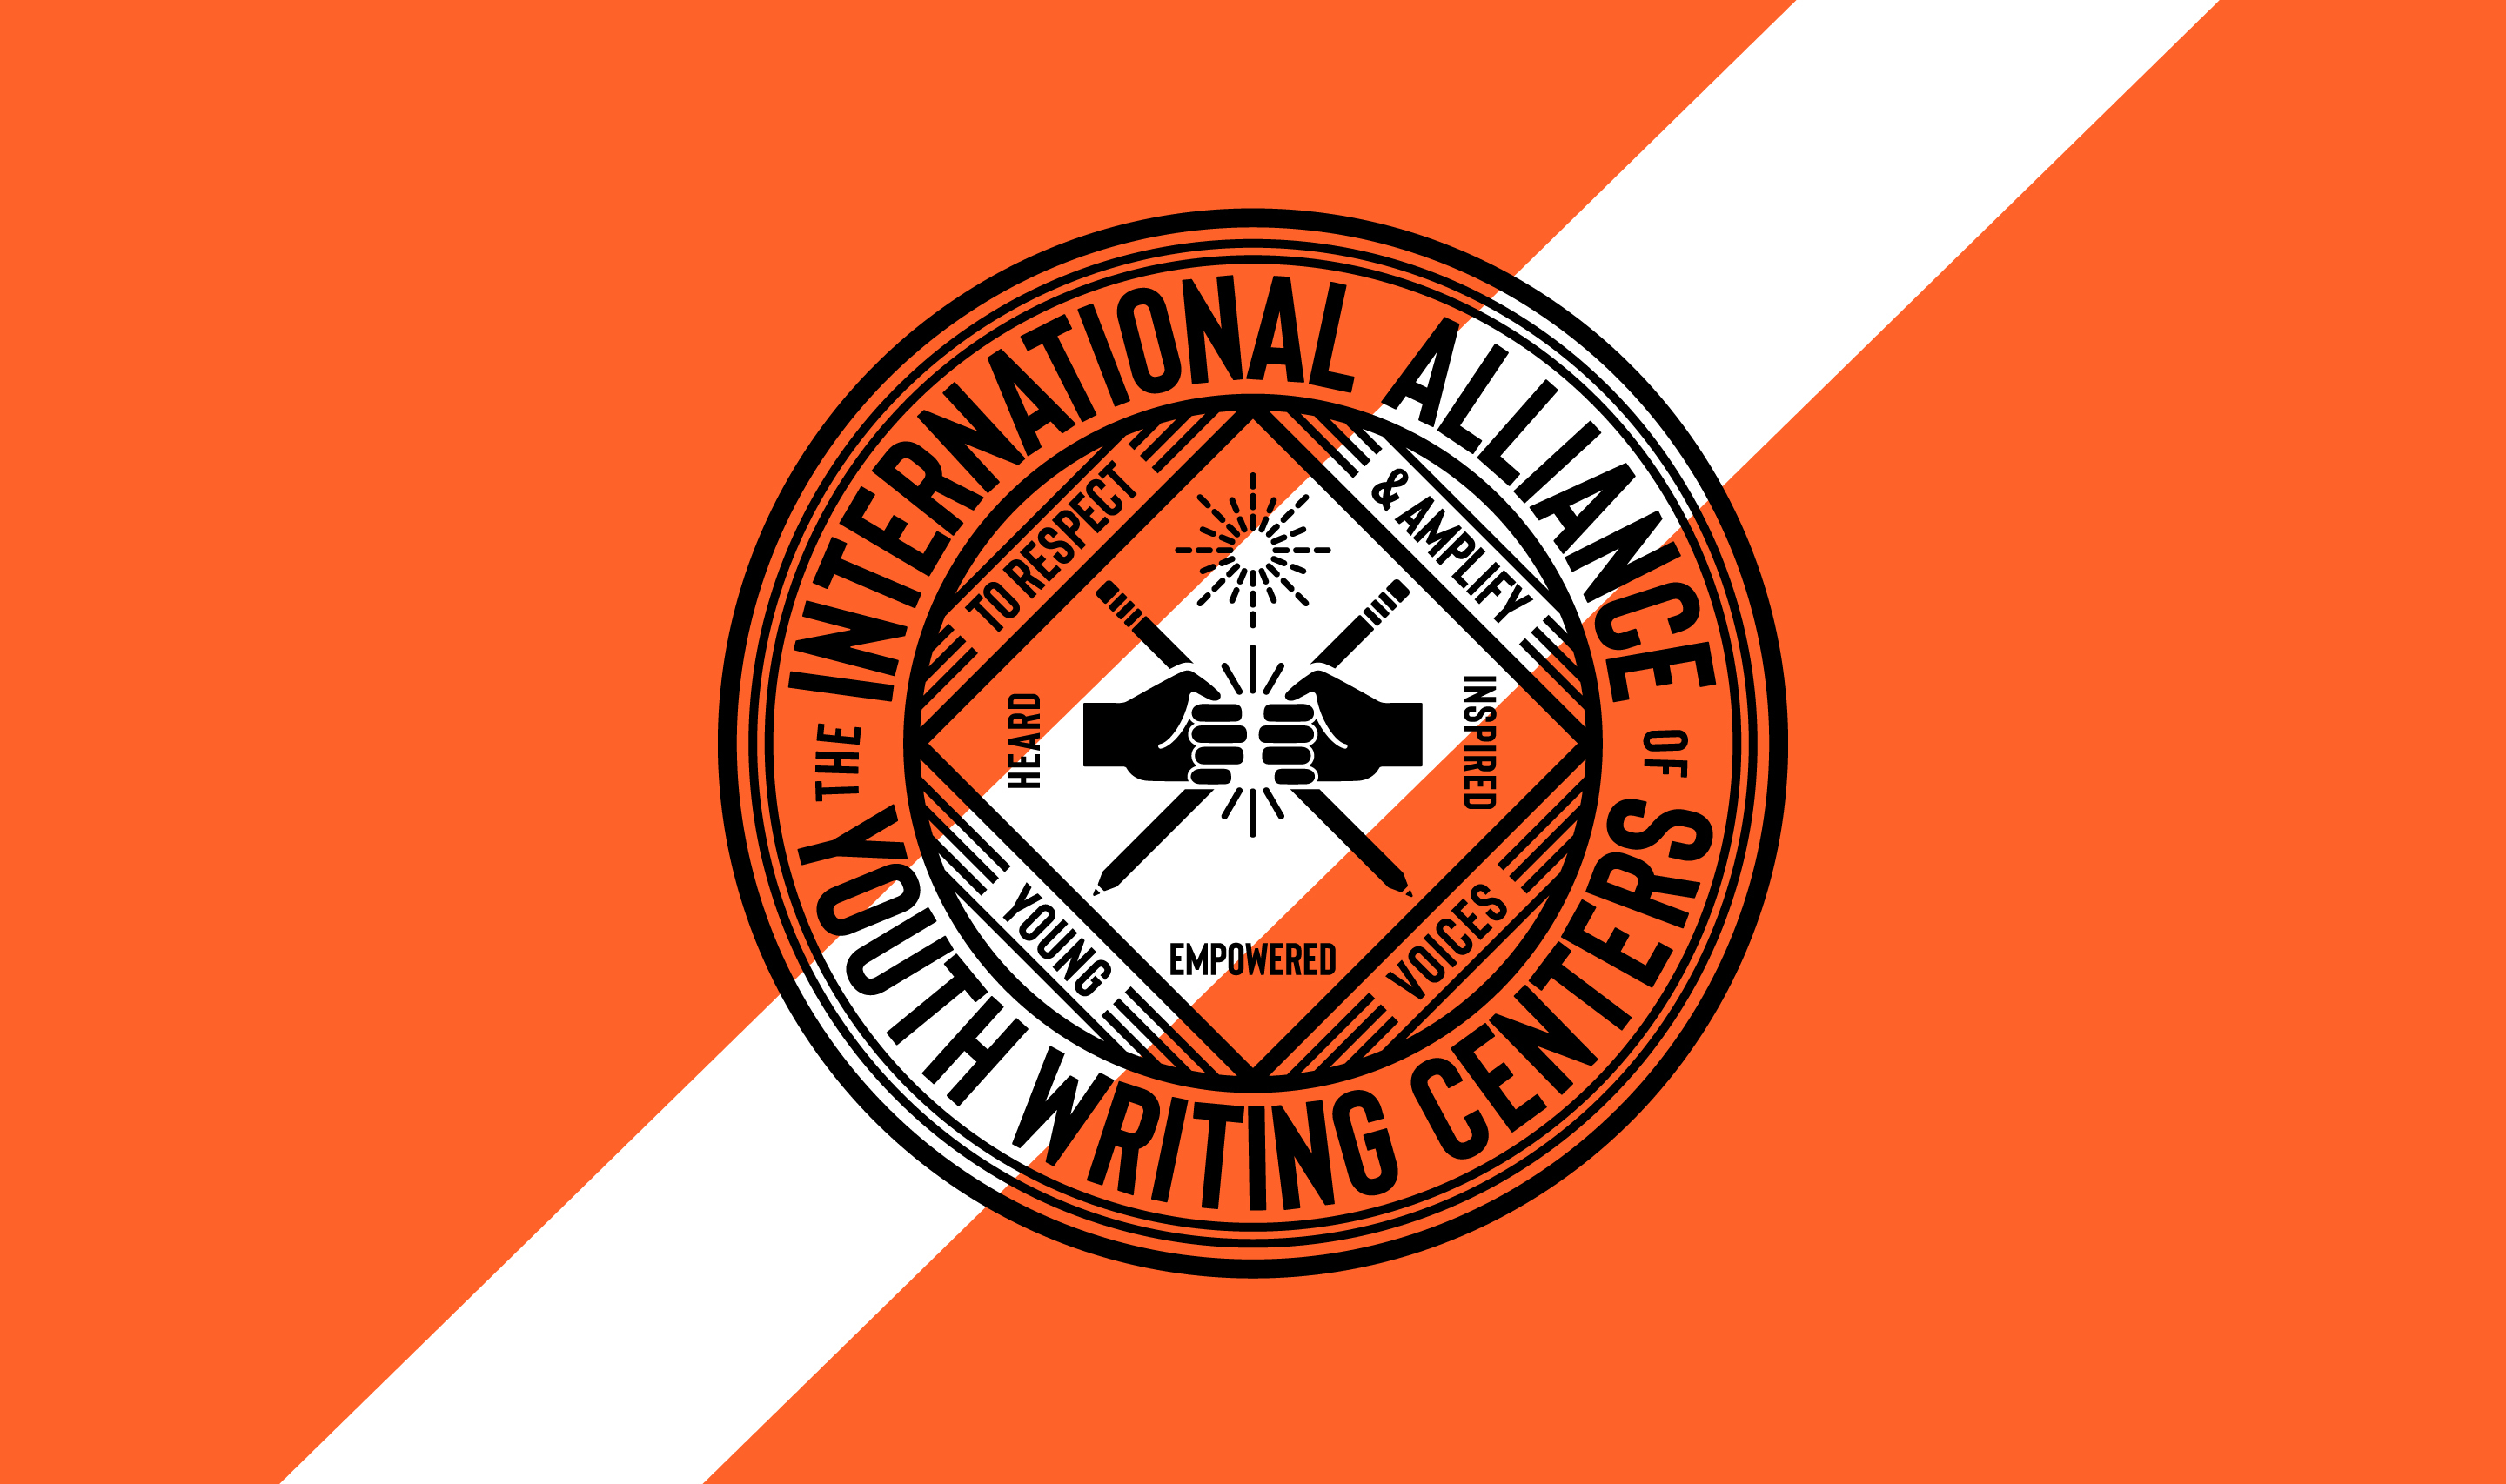 Office Intl Alliance of Youth Writing Centers Logo